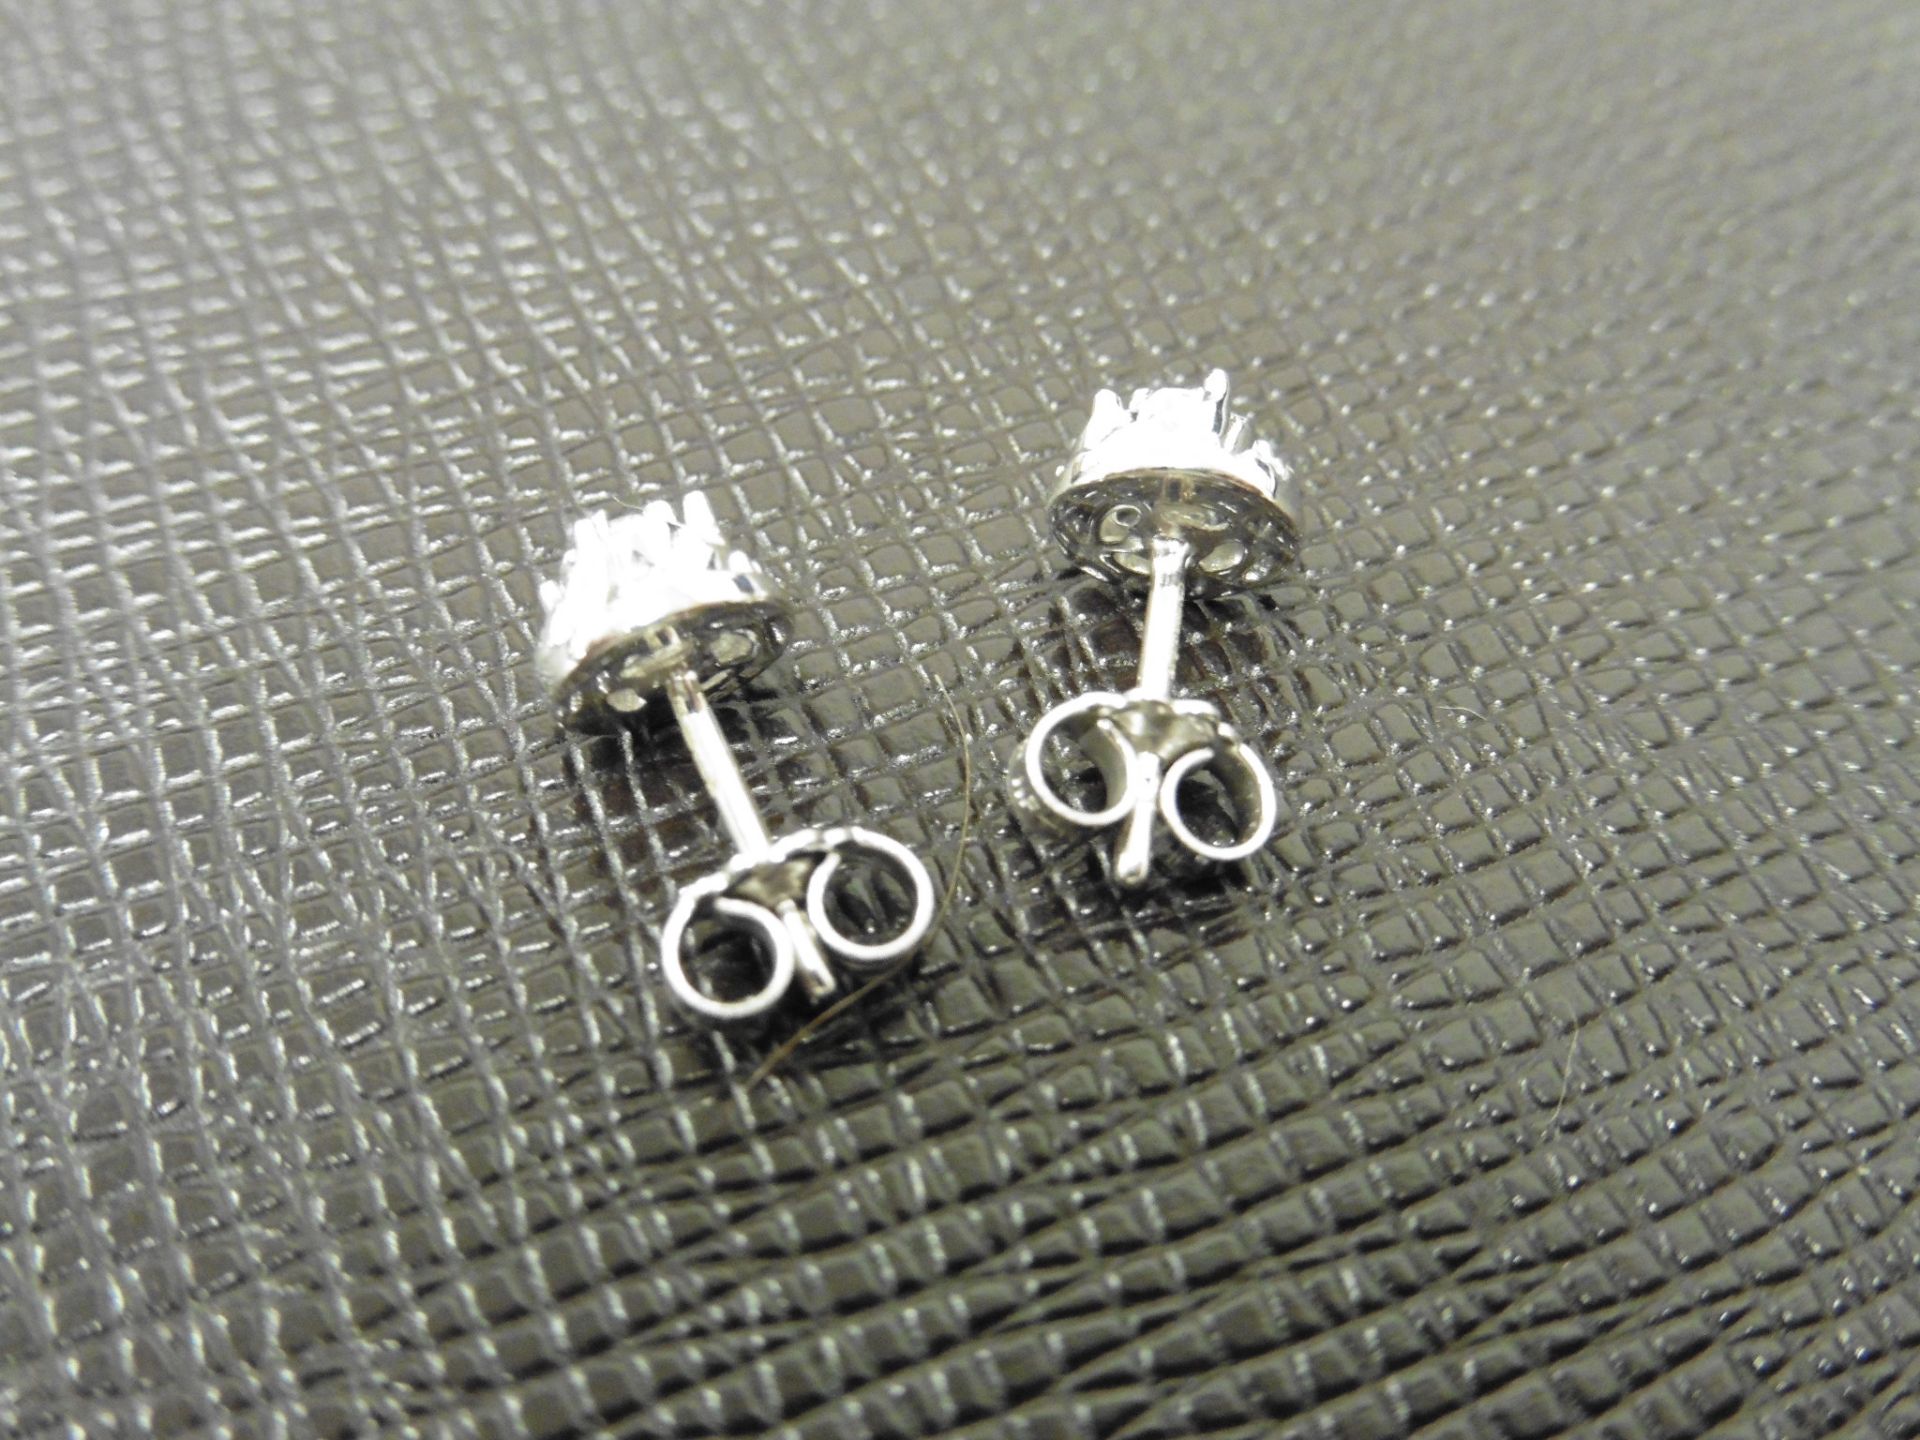 0.25ct diamond set stud earrings in 9ct white gold. Small brilliant cut diamonds. H colour and I1- - Image 3 of 3